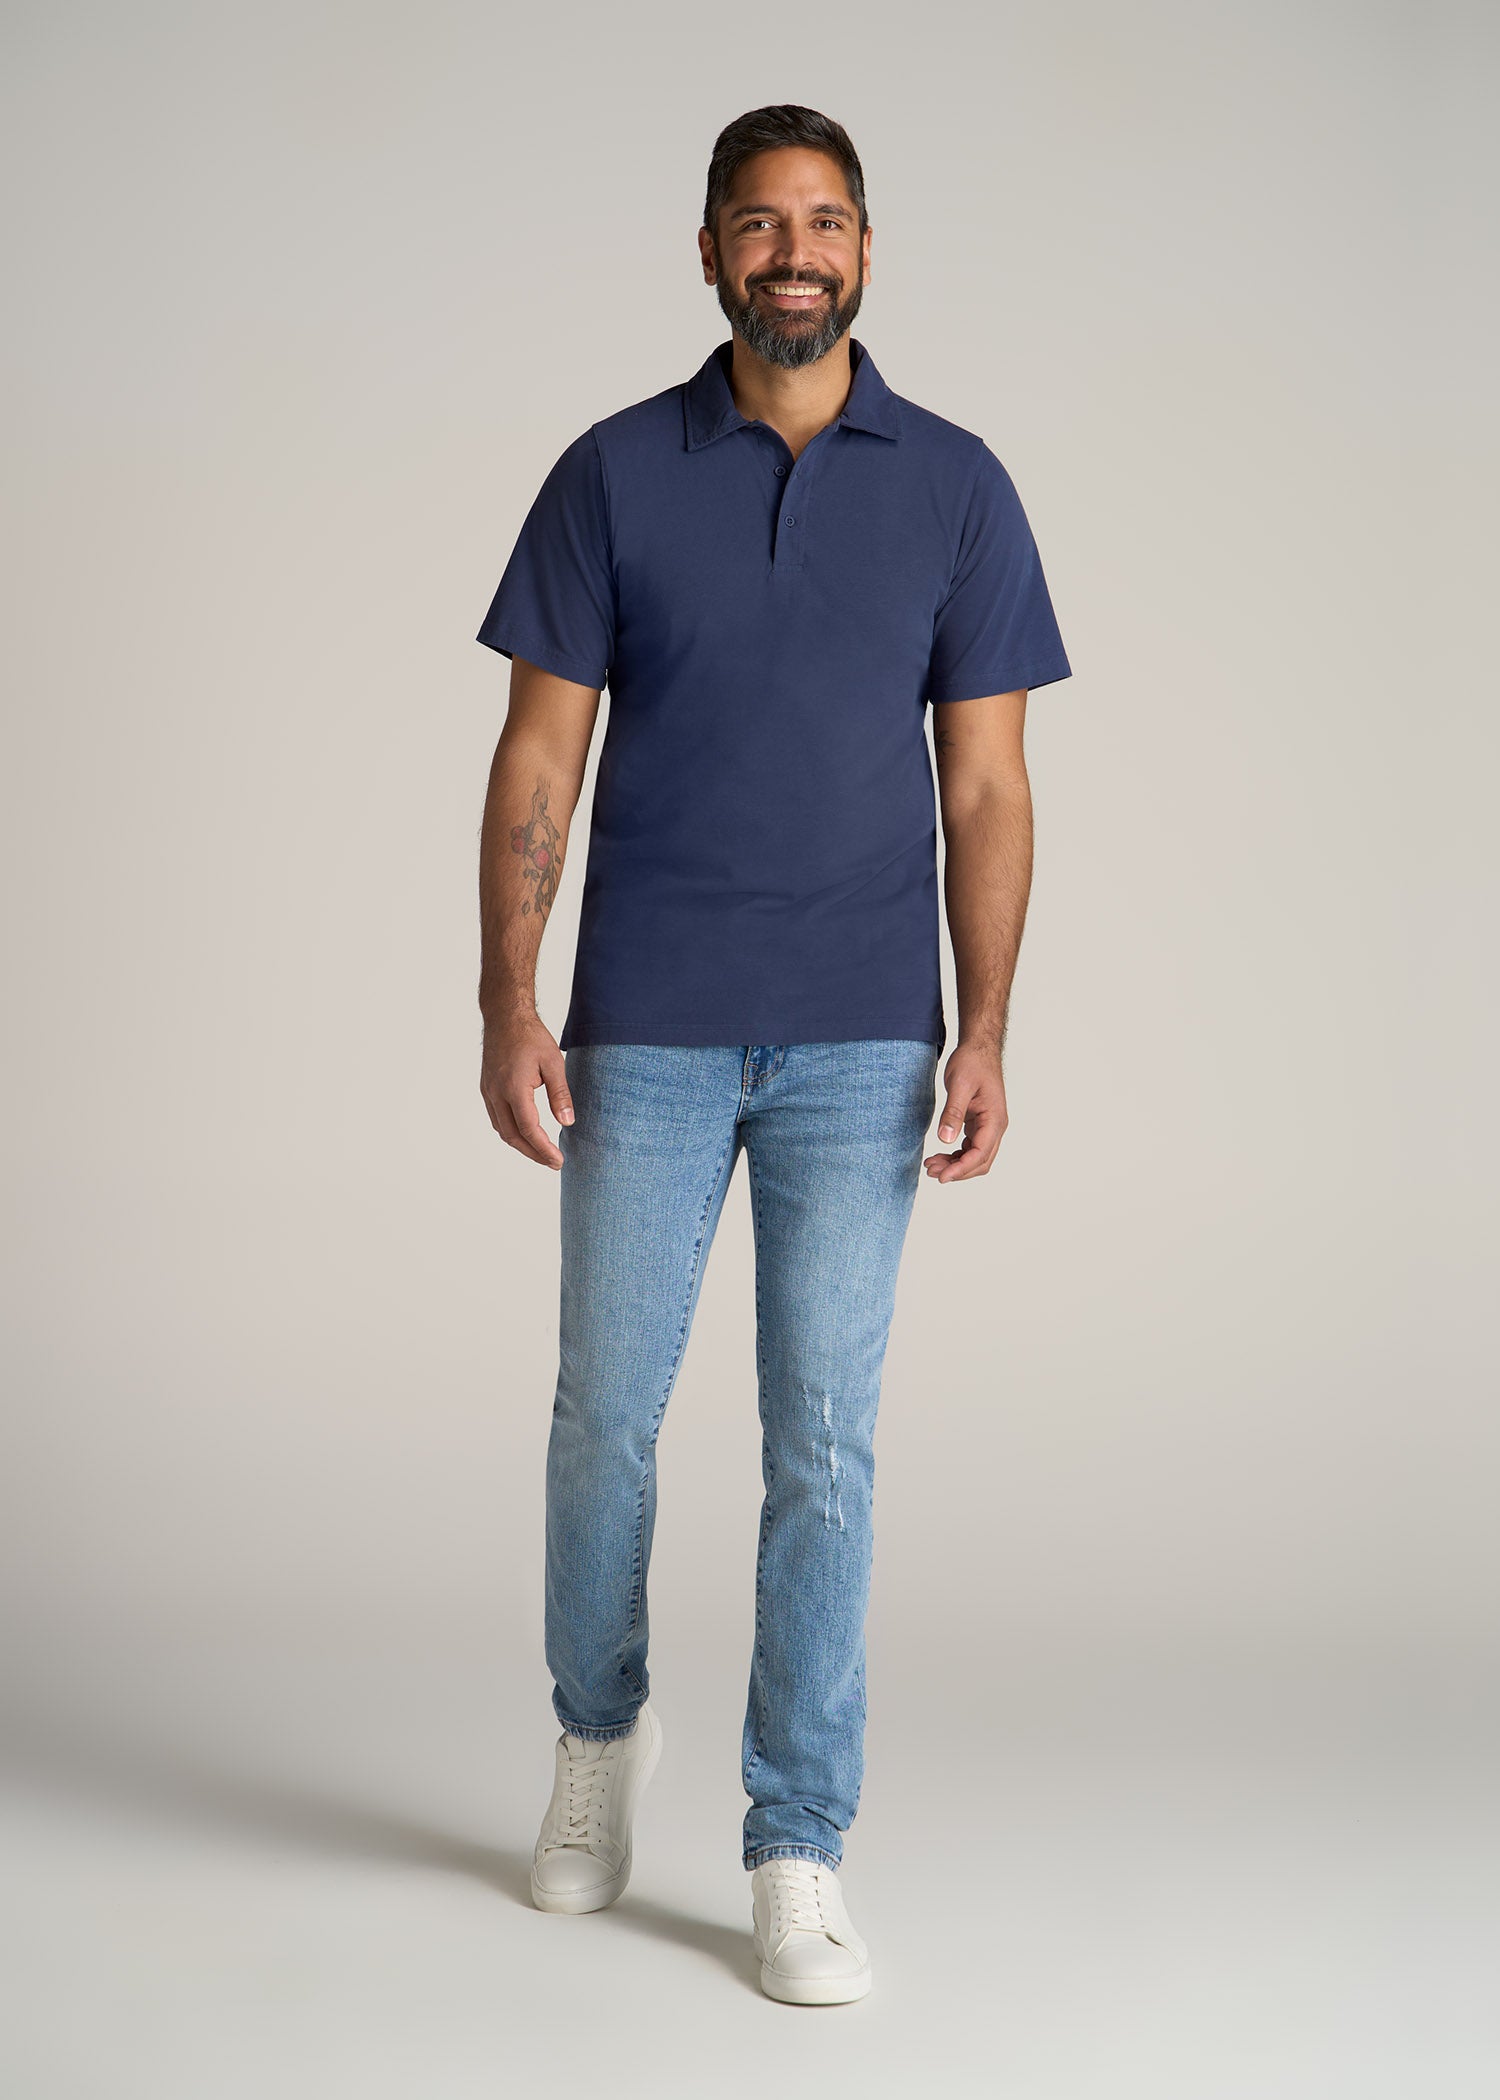 Embroidered Short Sleeve Shirt in Natural – Marine Layer